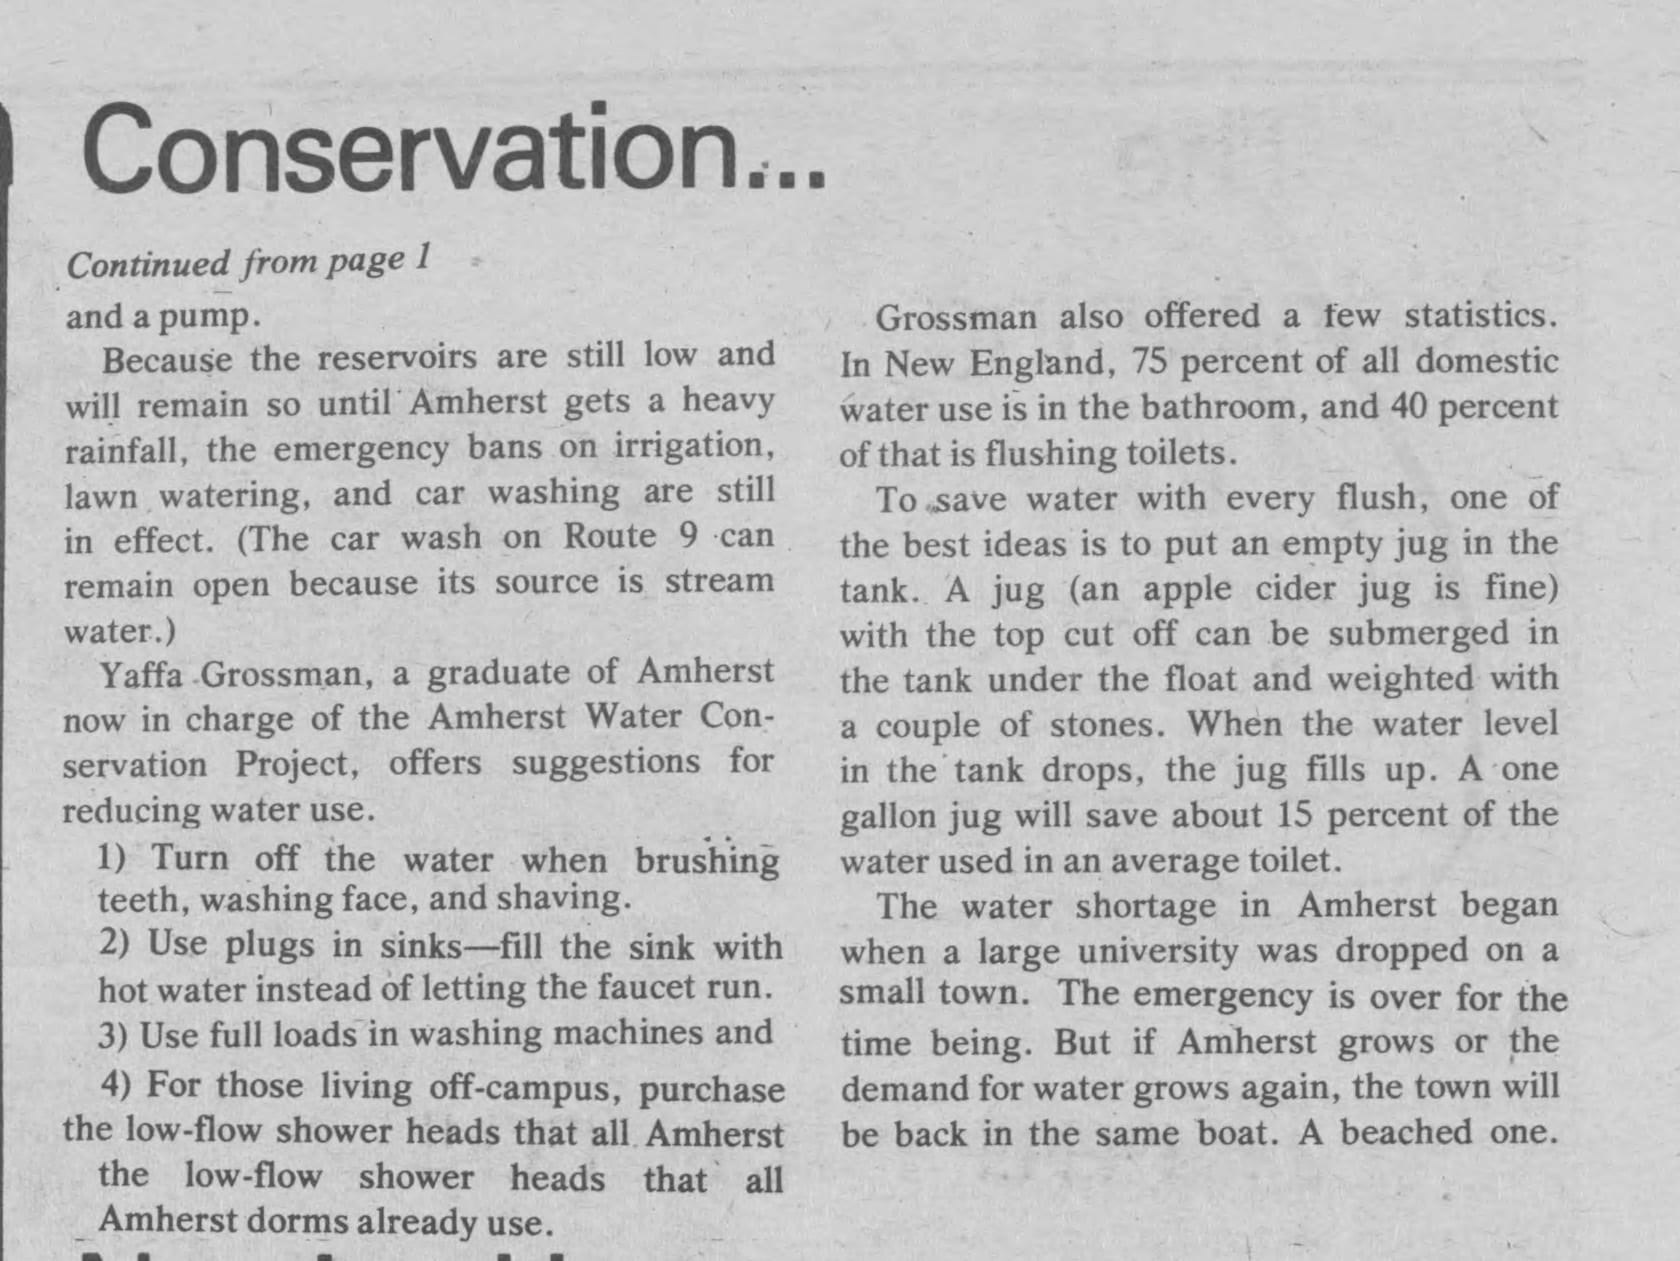 The Amherst Student, Sept. 29, 1980